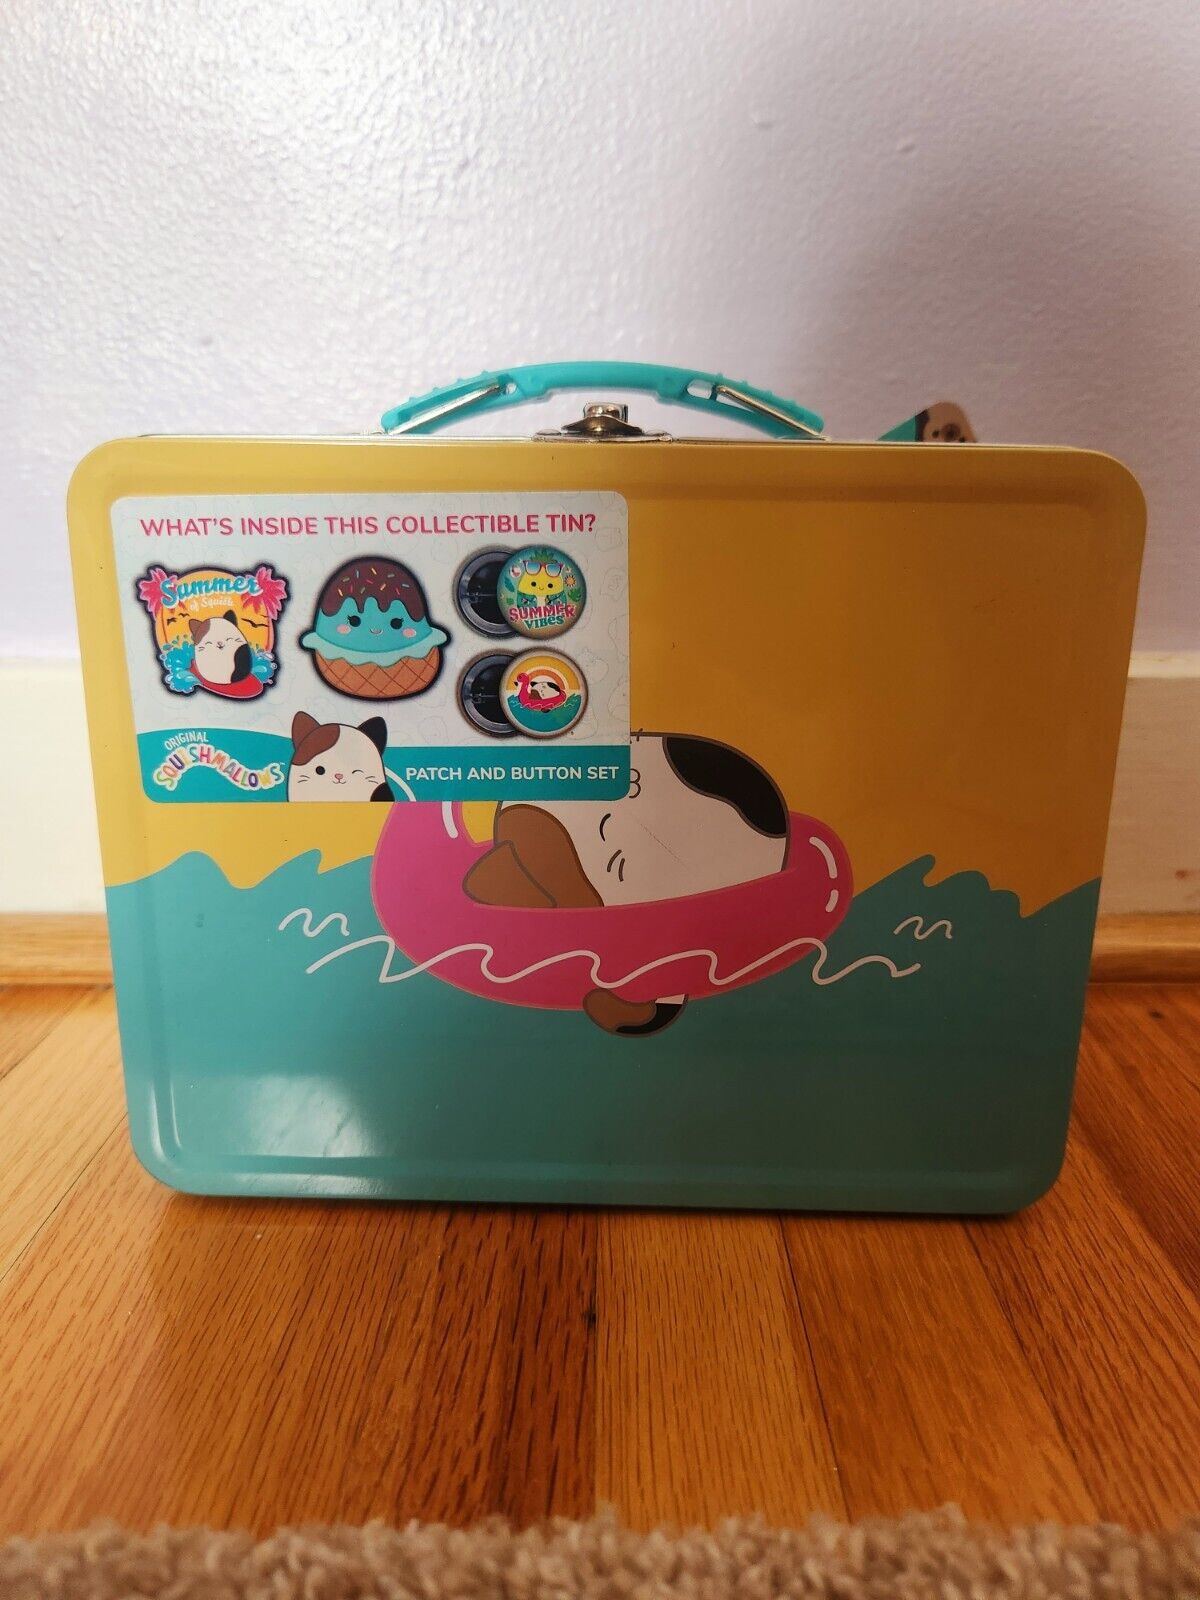 Original Squishmallows Metal Lunchbox Tin With Patch & Button Set